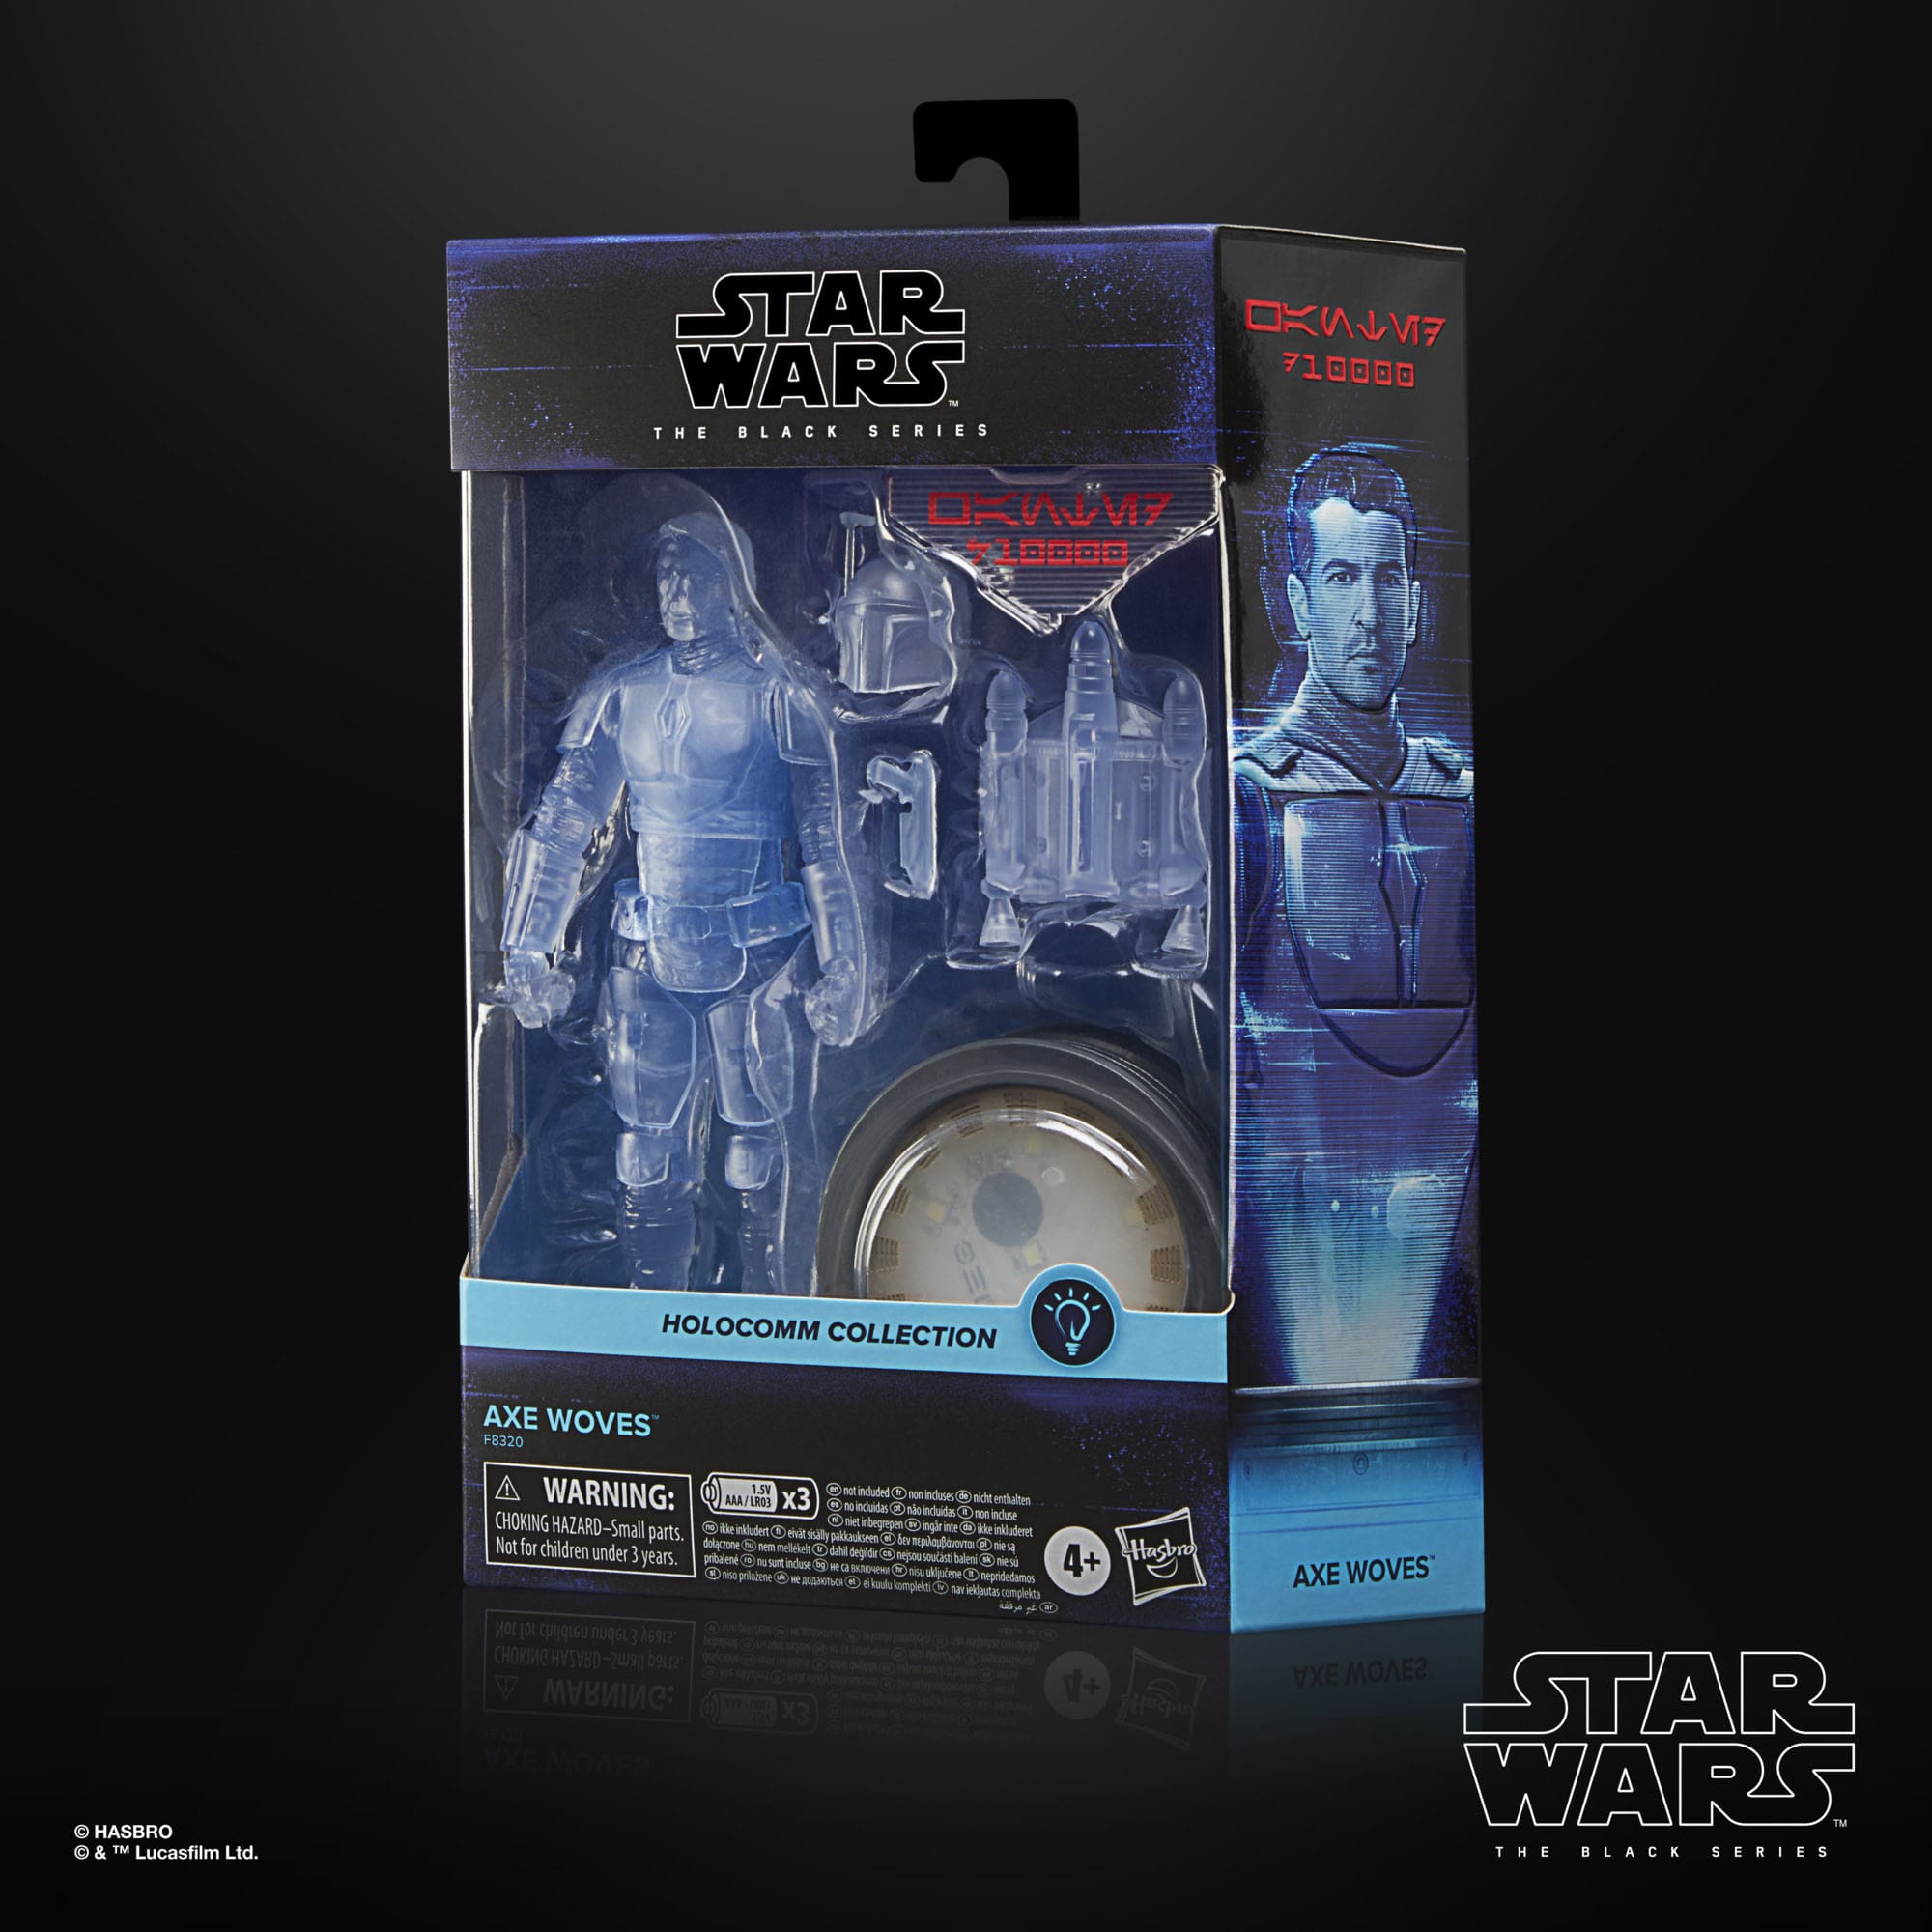 Star Wars Black Series Holocomm Collection Actionfigur Axe Woves 15 cm F8320 5010996179869